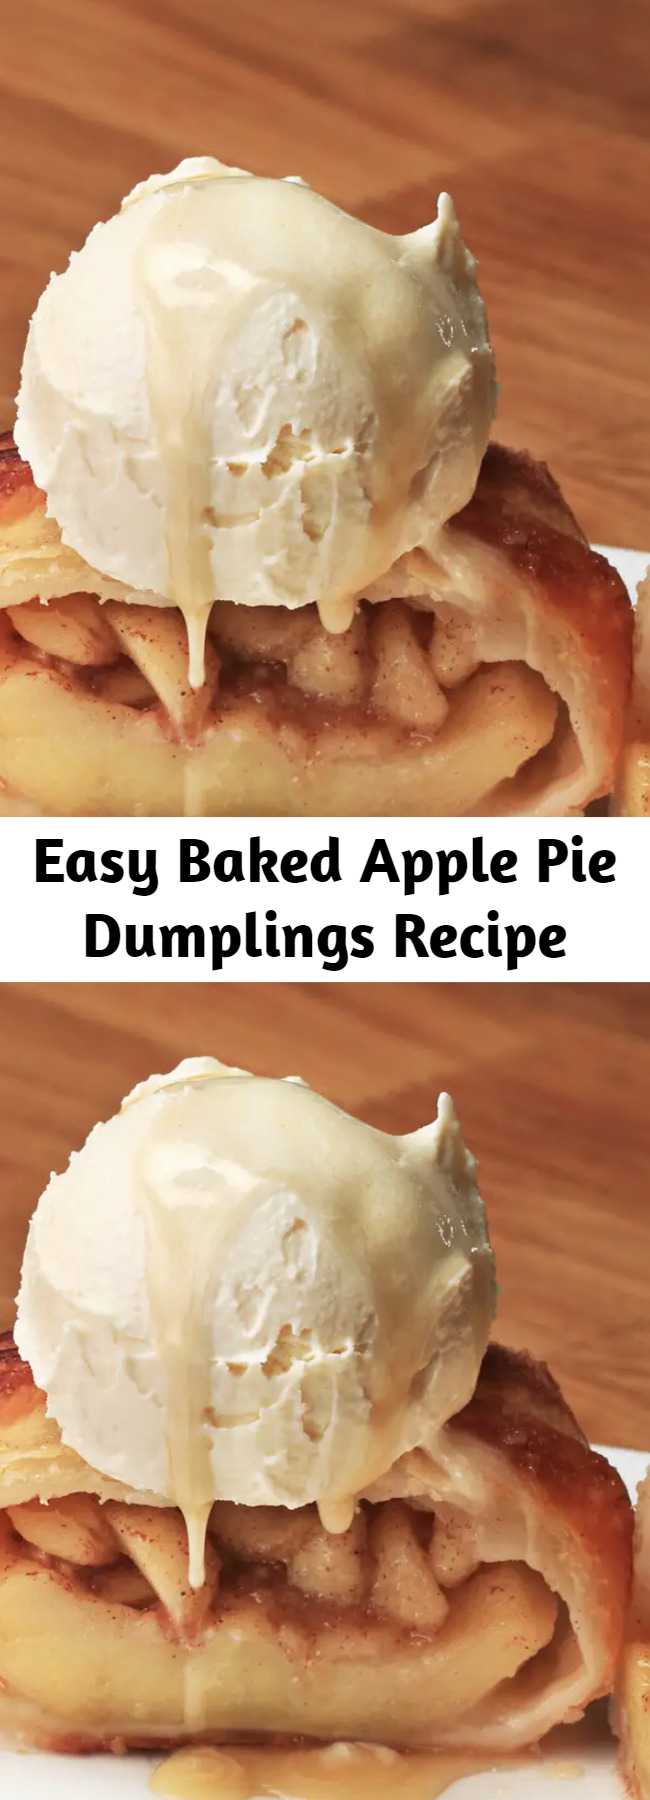 Easy Baked Apple Pie Dumplings Recipe - Snuggle up for Fall with these Apple Pie Dumplings!